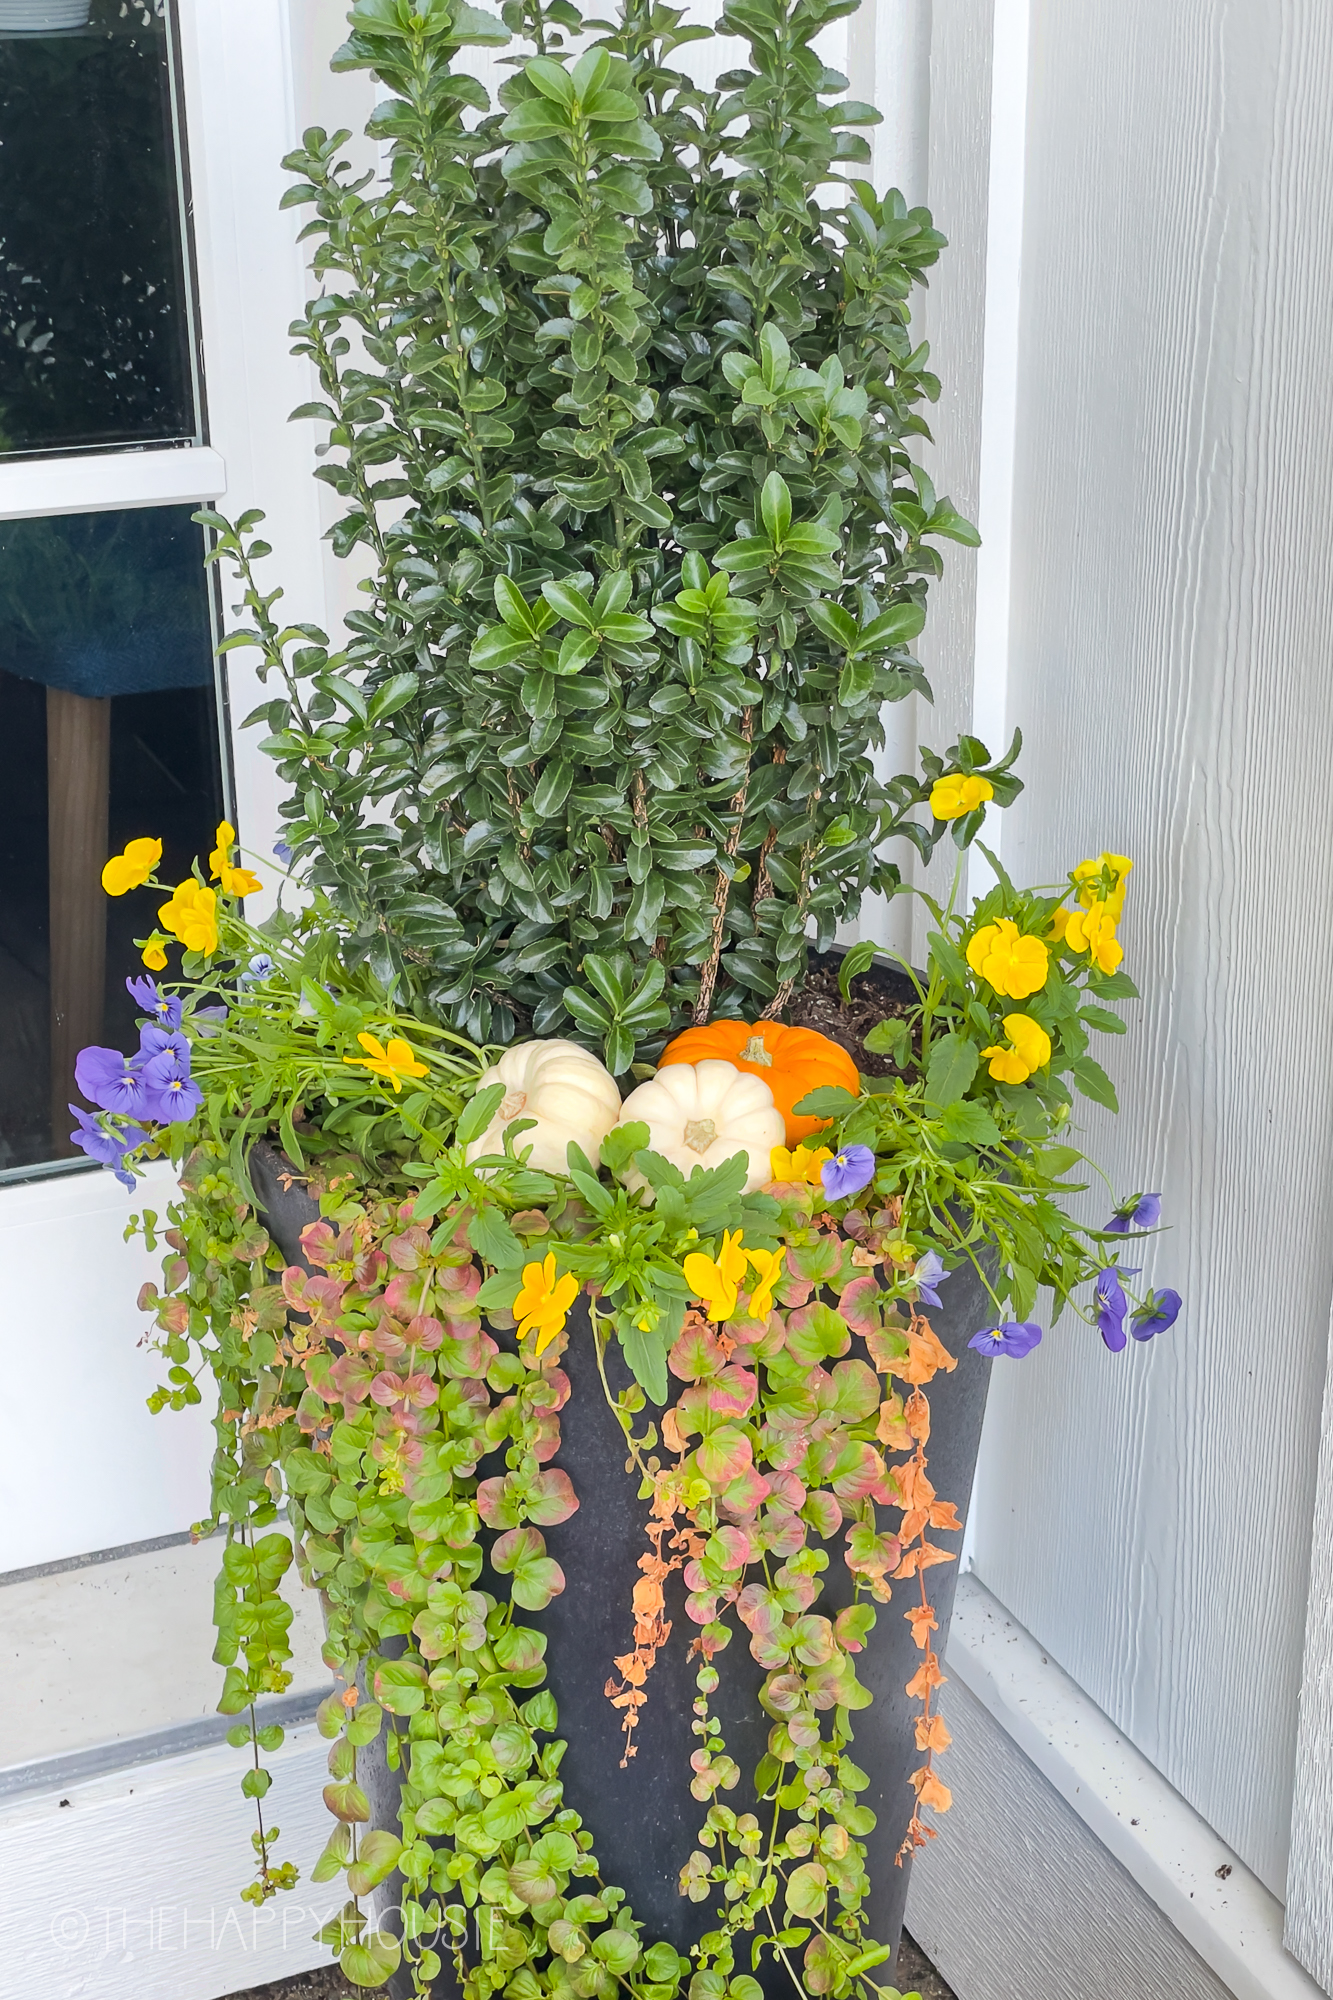 A large pot is filled with flowers and vines by the front door.